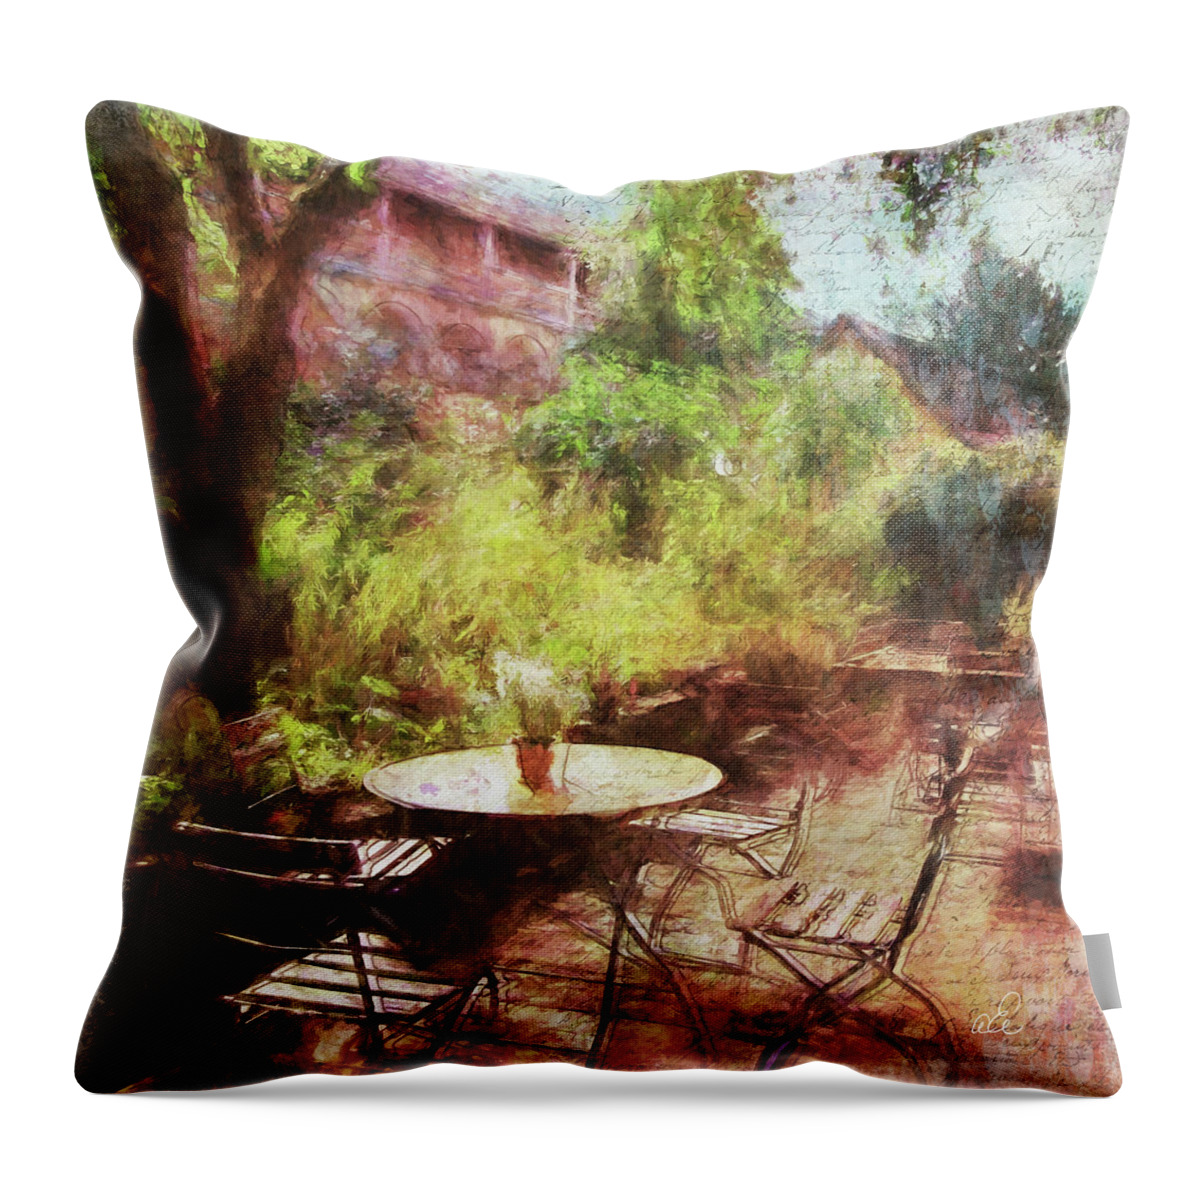 Caf� Throw Pillow featuring the photograph Cafe Gerberhaus by Looking Glass Images